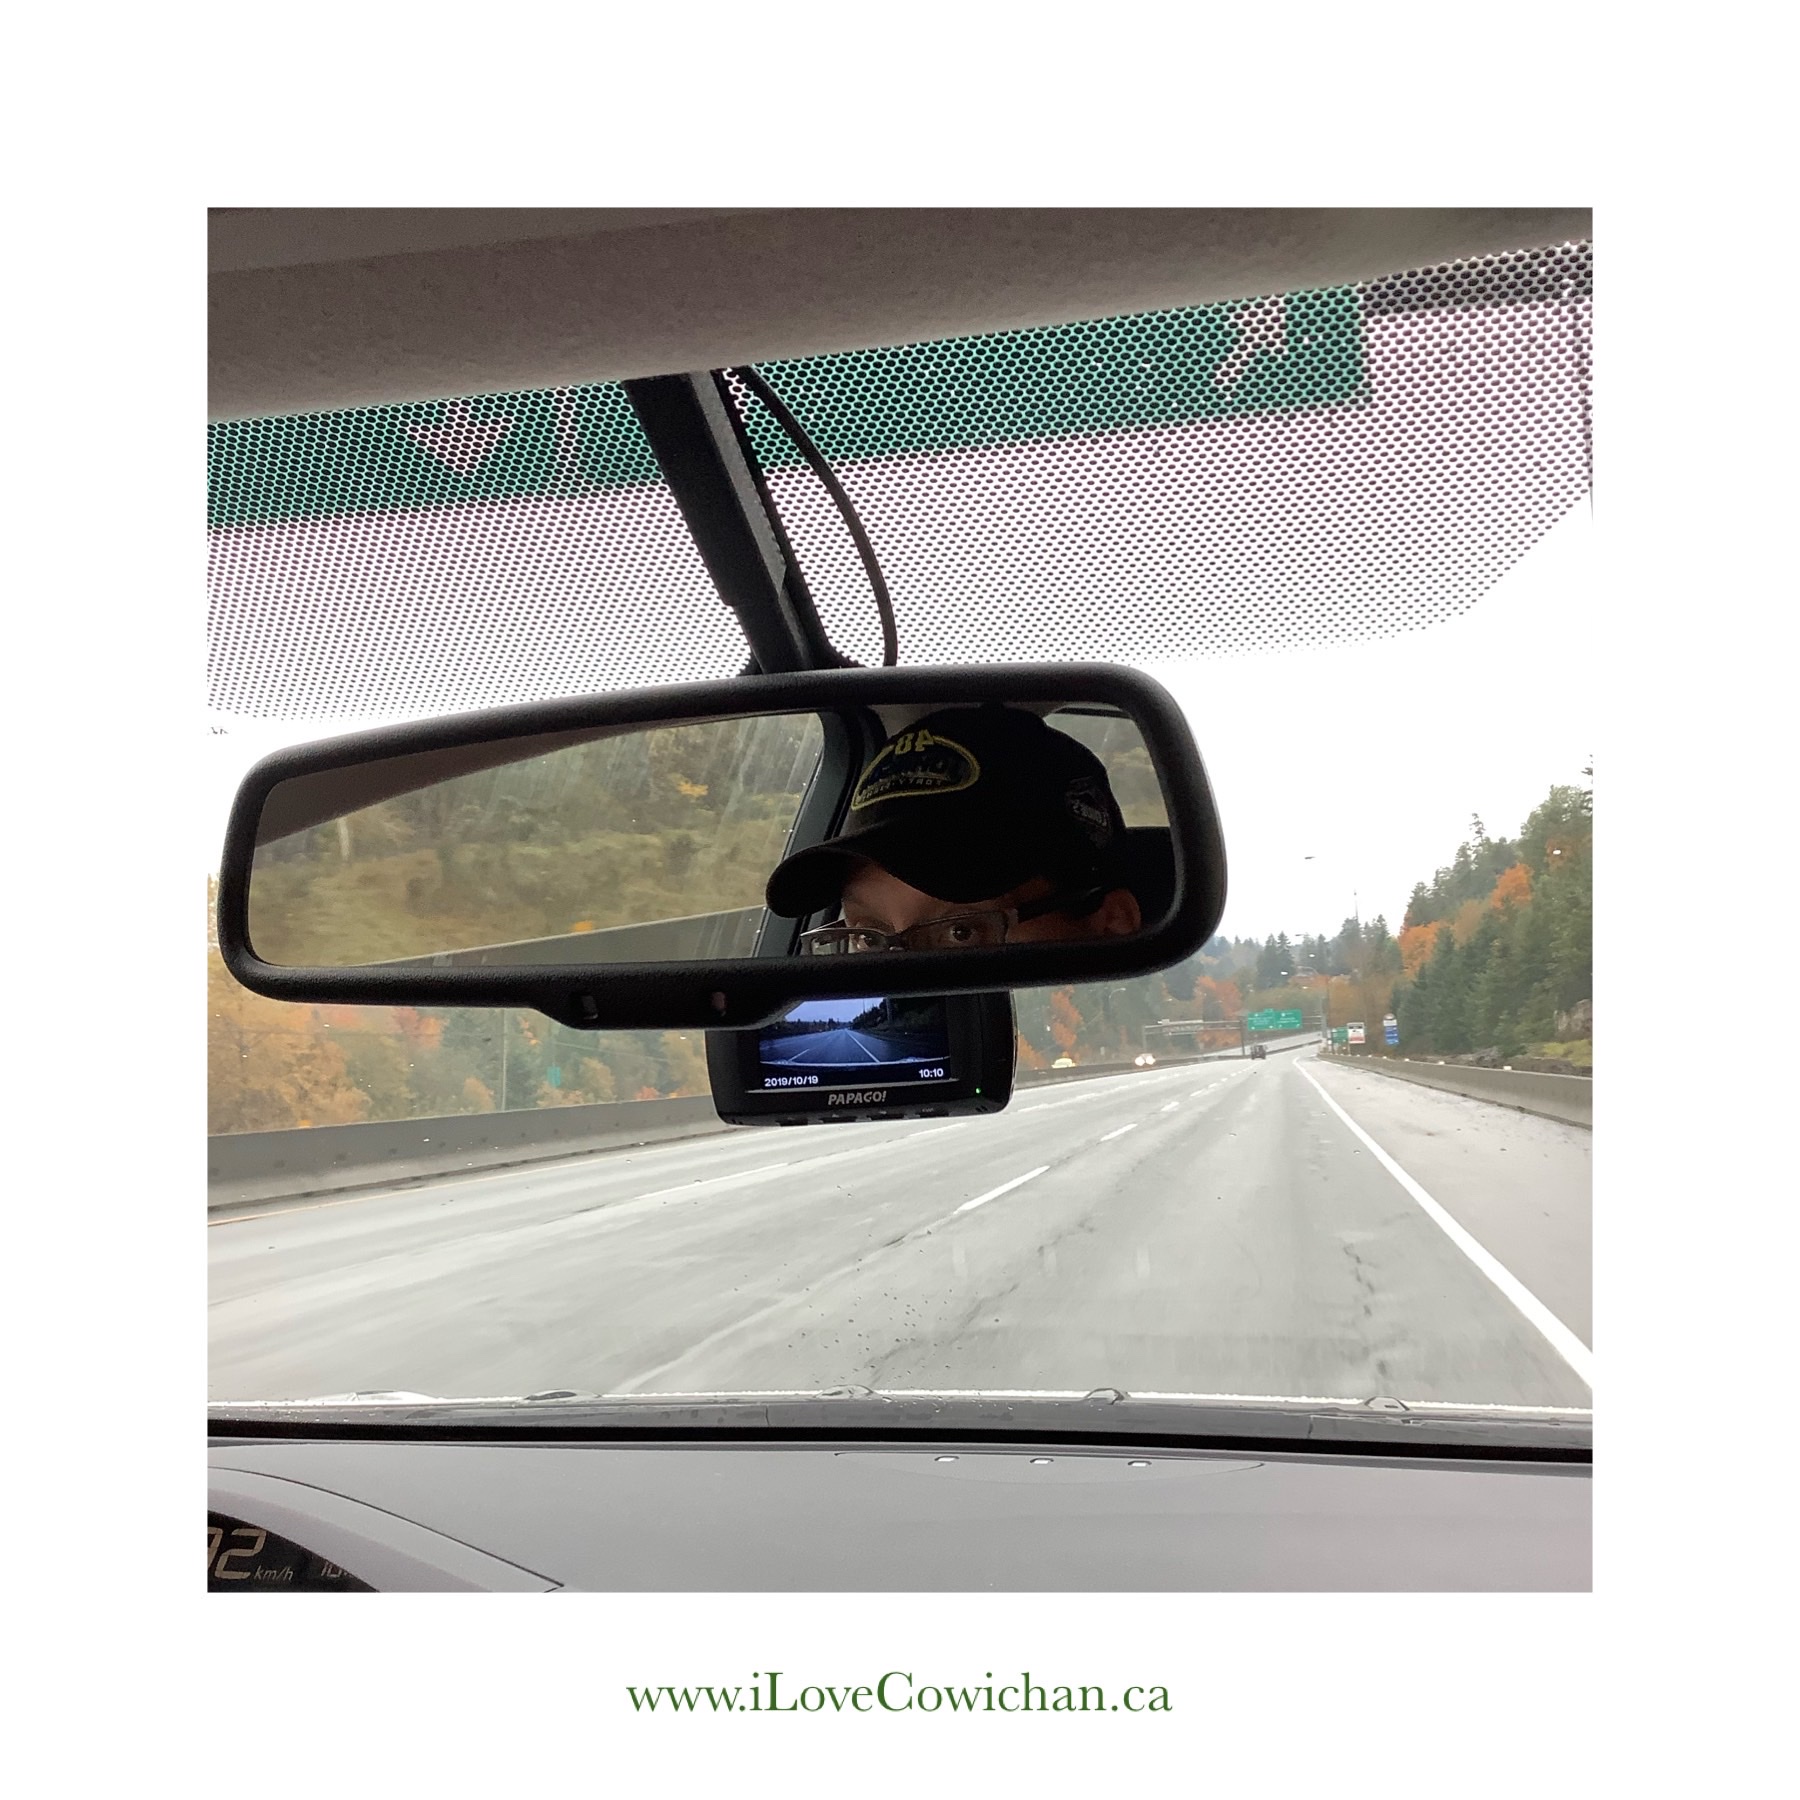 A Rainy Day Drive to Nanaimo I Love Cowichan Blog Post - photo by Shelley Lockwood - Taking the 19 